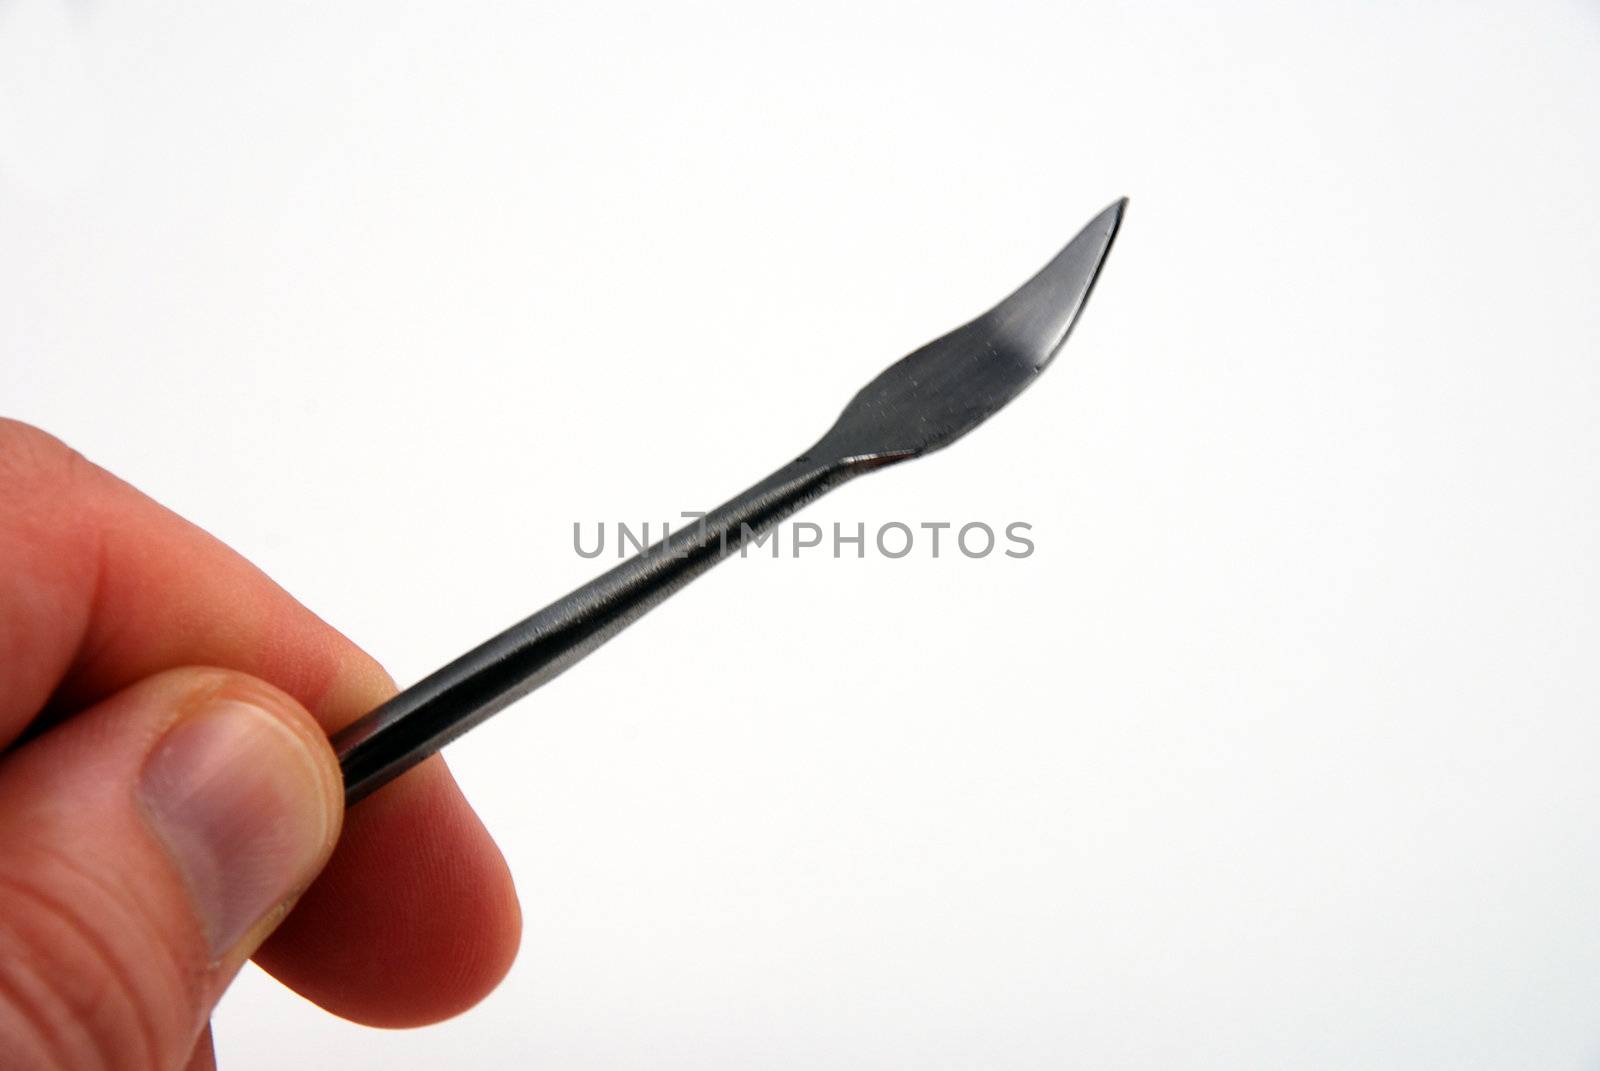 Stock pictures of metal dental instruments used to work on patients